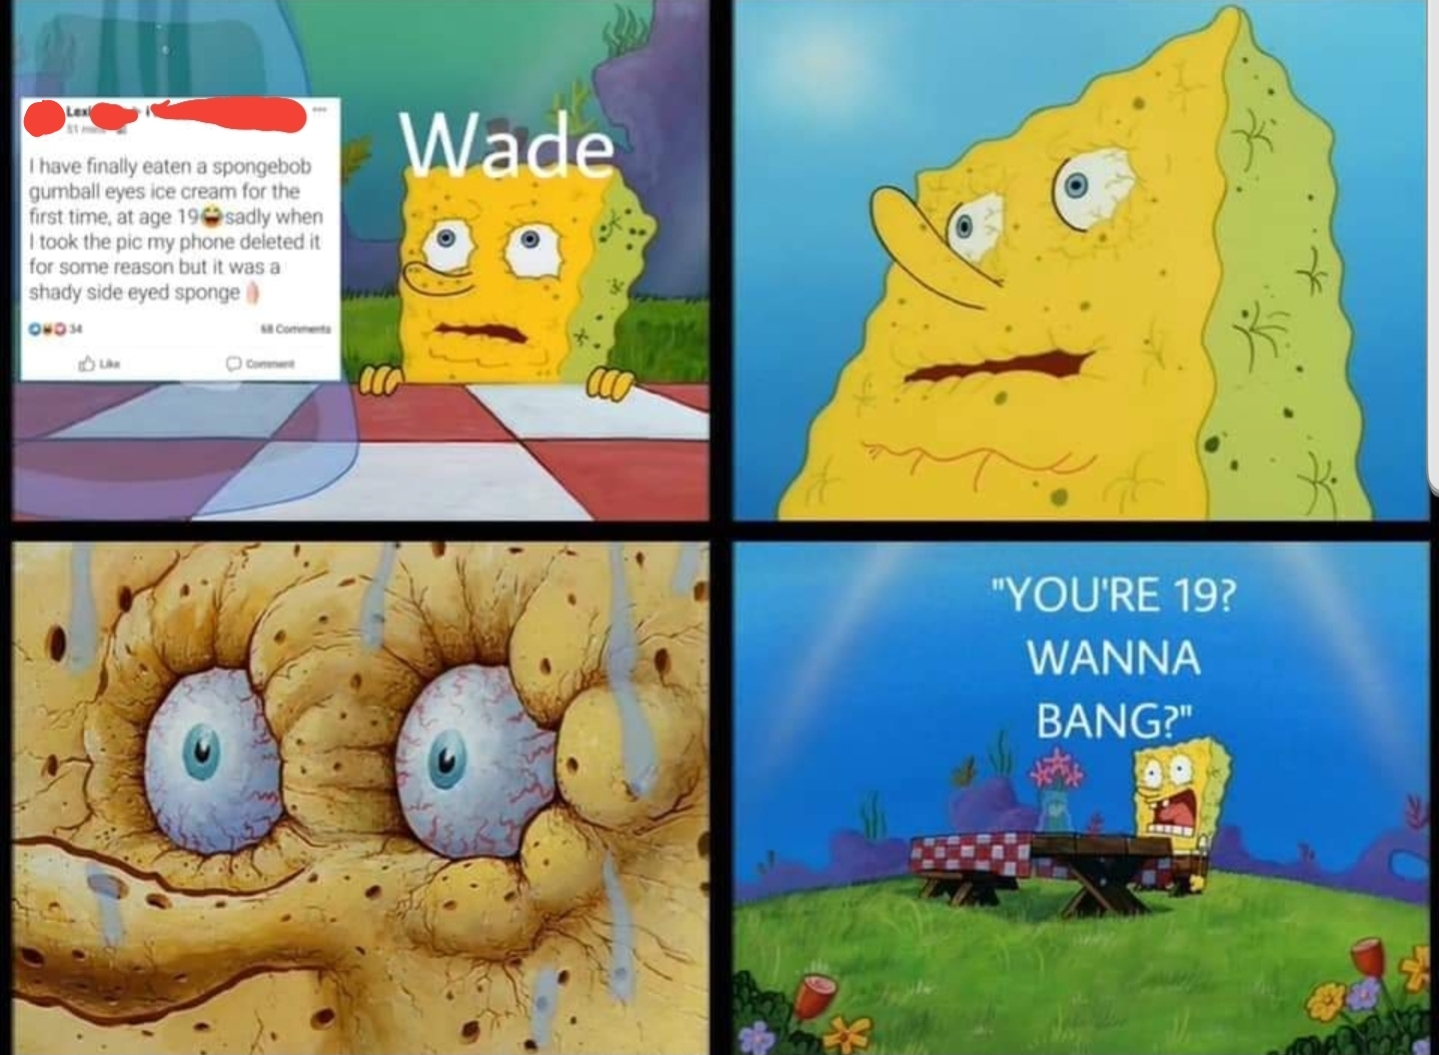 spongebob meme - spongebob meme templates - Wade I have finally eaten a spongebob Gumball eyes ice cream for the first time at age 19 sadly when I took the pic my phone deleted it for some reason but it was shady side eyed sponge Quo "You'Re 19? Wanna Ban